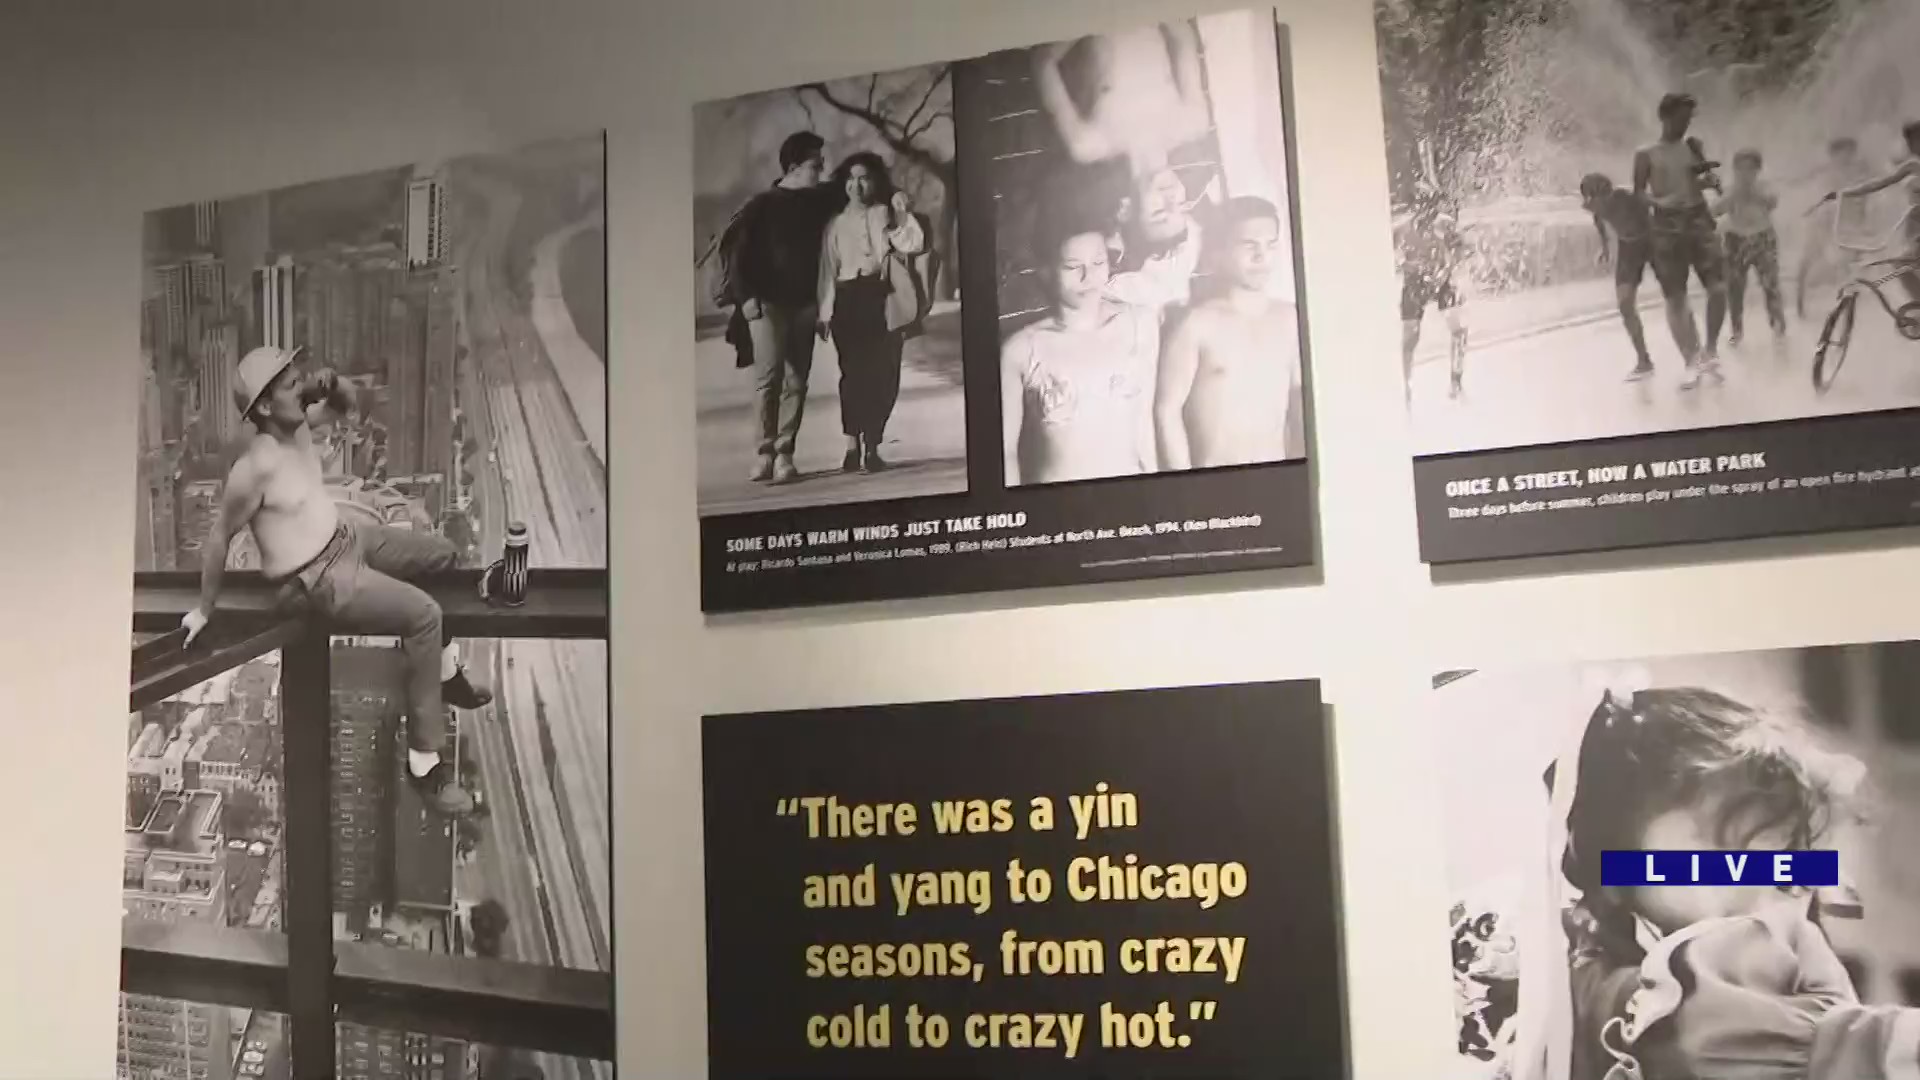 Around Town visits the Chicago History Museum